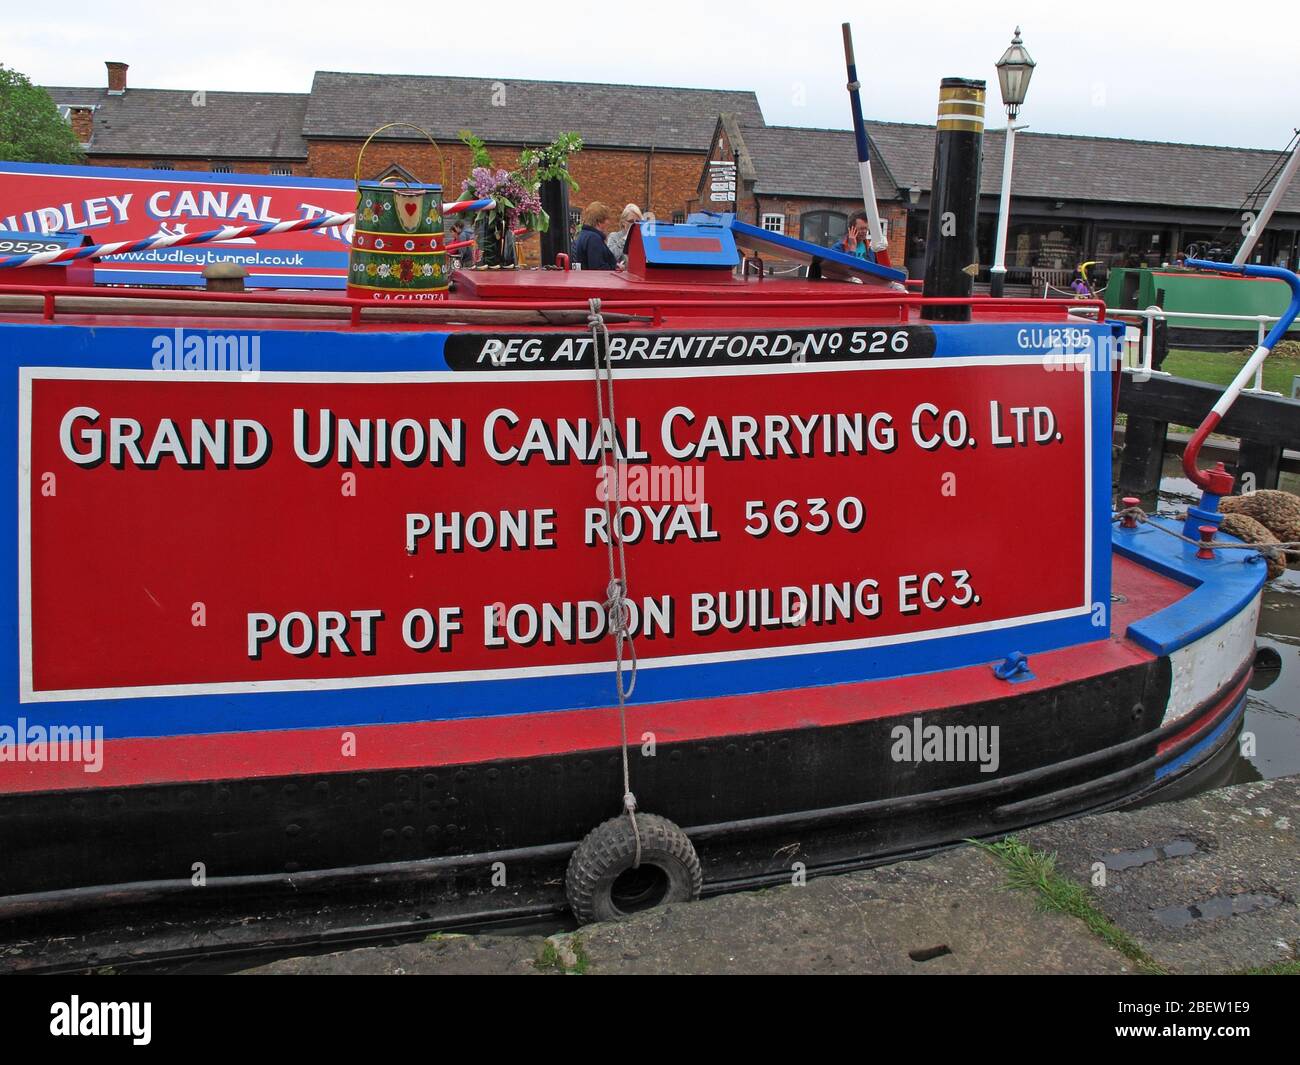 Grand Union Canal Carrying Co Ltd, Ellesmere Port Canal Museum, South Pier Rd, Ellesmere Port,Cheshire, England, UK,  CH65 4FW Stock Photo